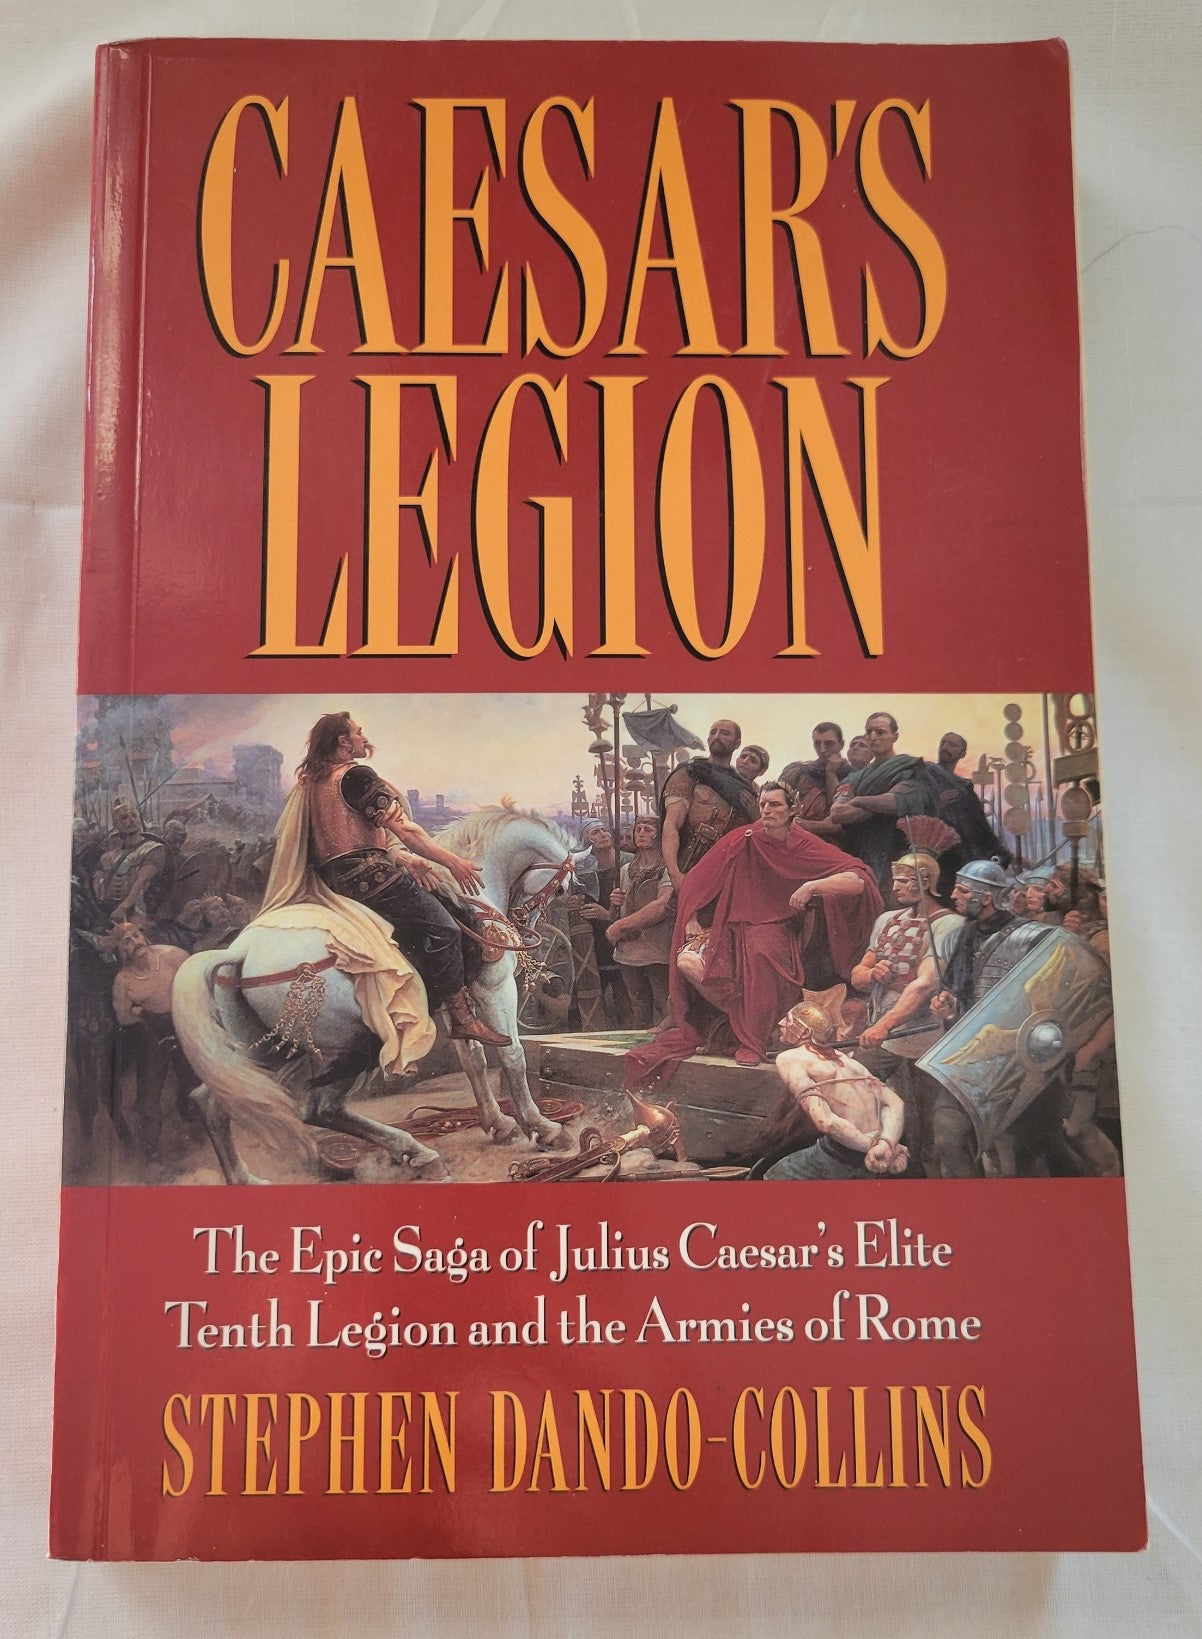 Caesar’s Legion: The Epic Saga of Julius Caesar’s Elite Tenth Legion and the Armies of Rome used book written by Stephen Dando-Collins, published by John Wiley & Sons, Inc.  View of front cover.